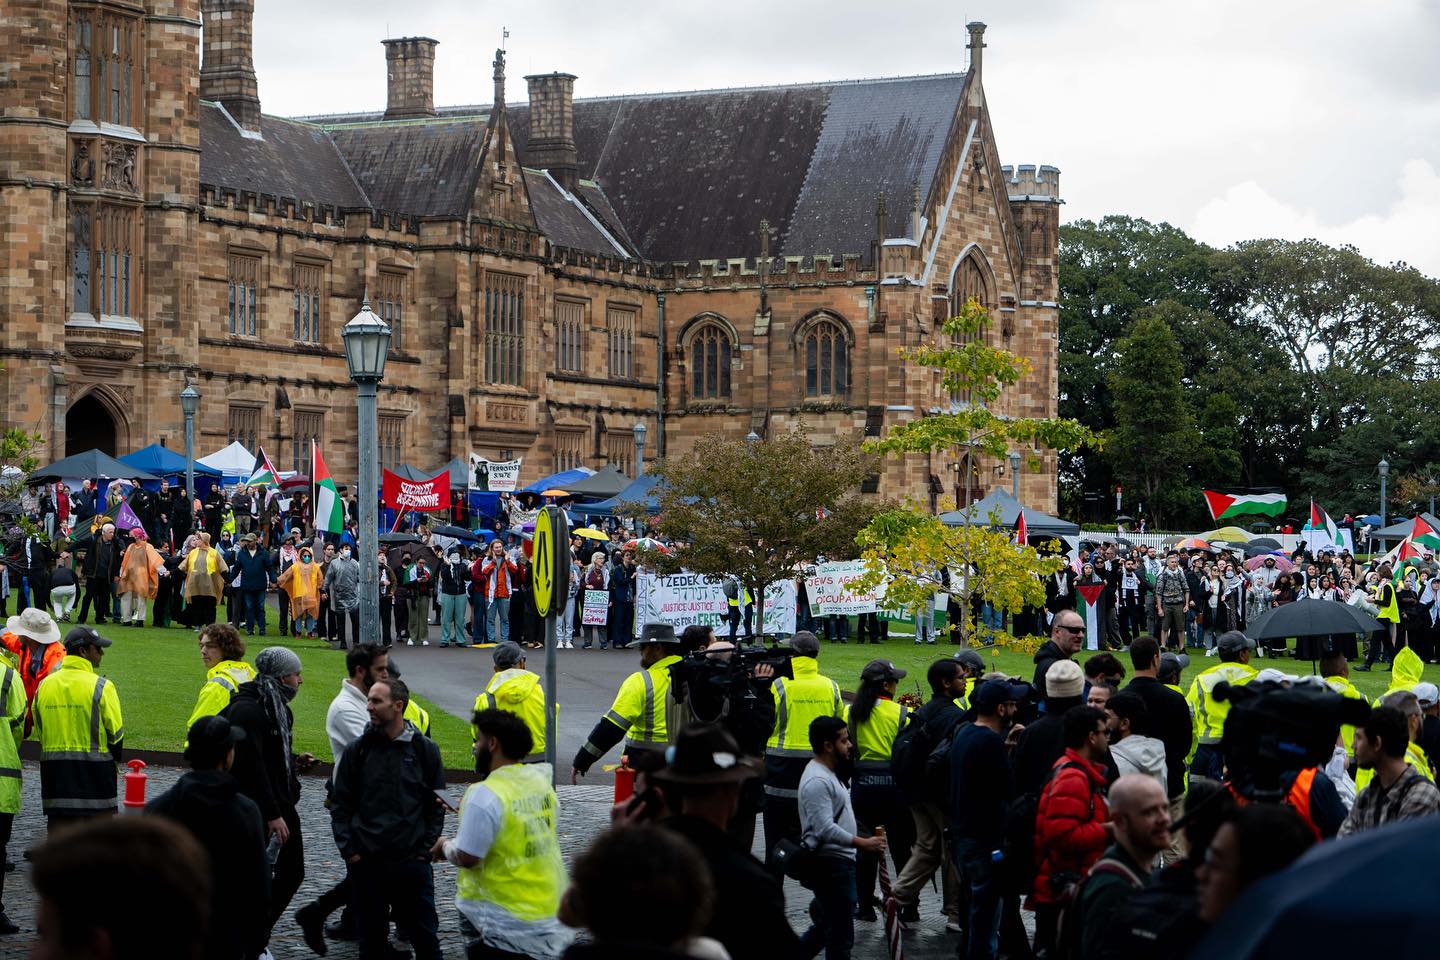 Palestine protesters outnumber small Zionist rally at the University of Sydney.